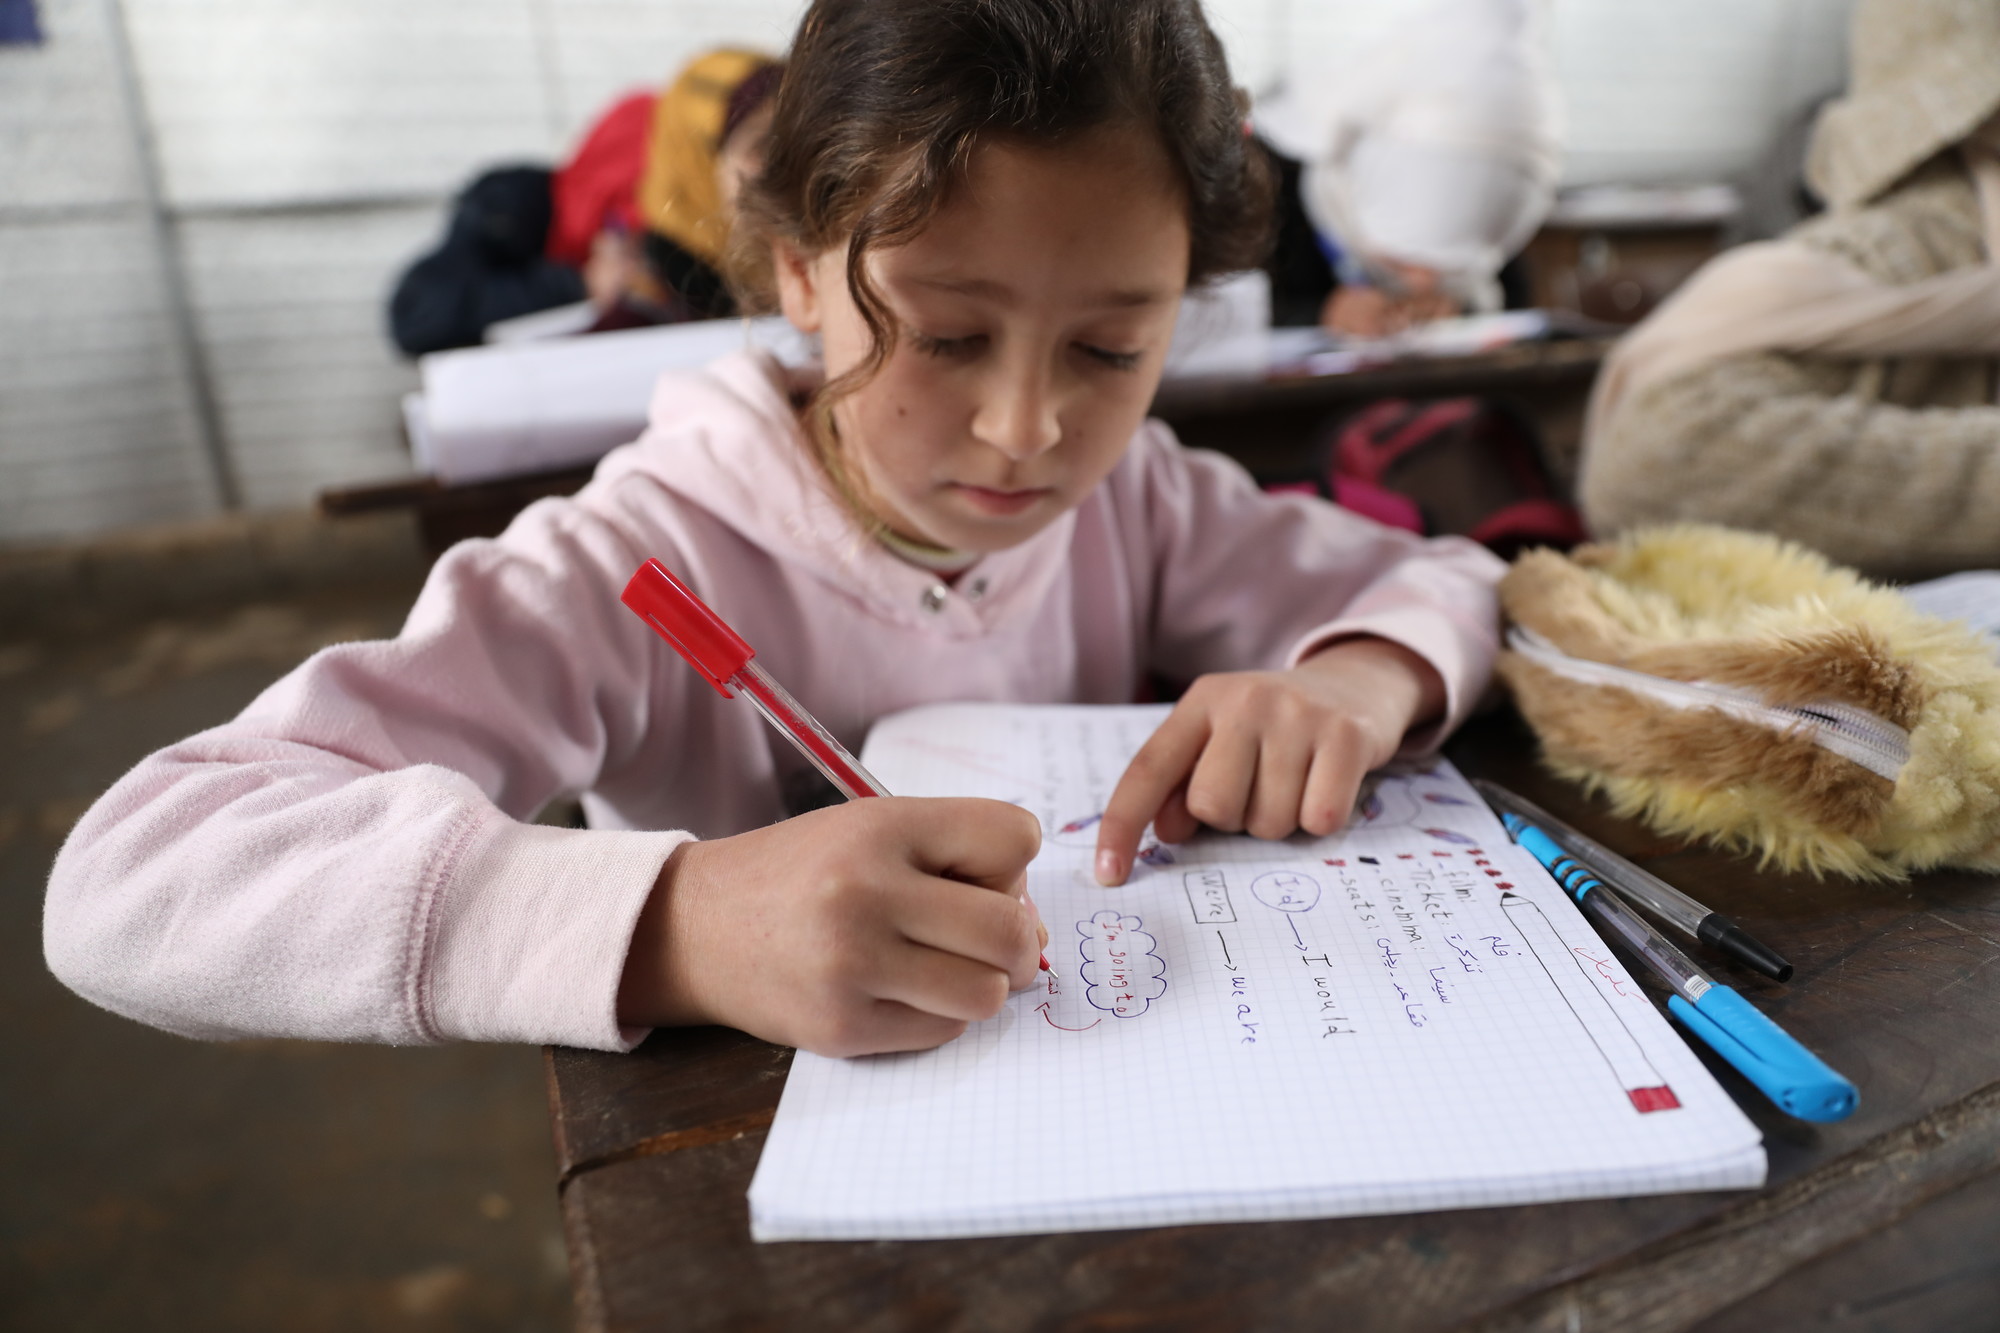 In Photos: Syrian girls share how 11 years of conflict has impacted their lives